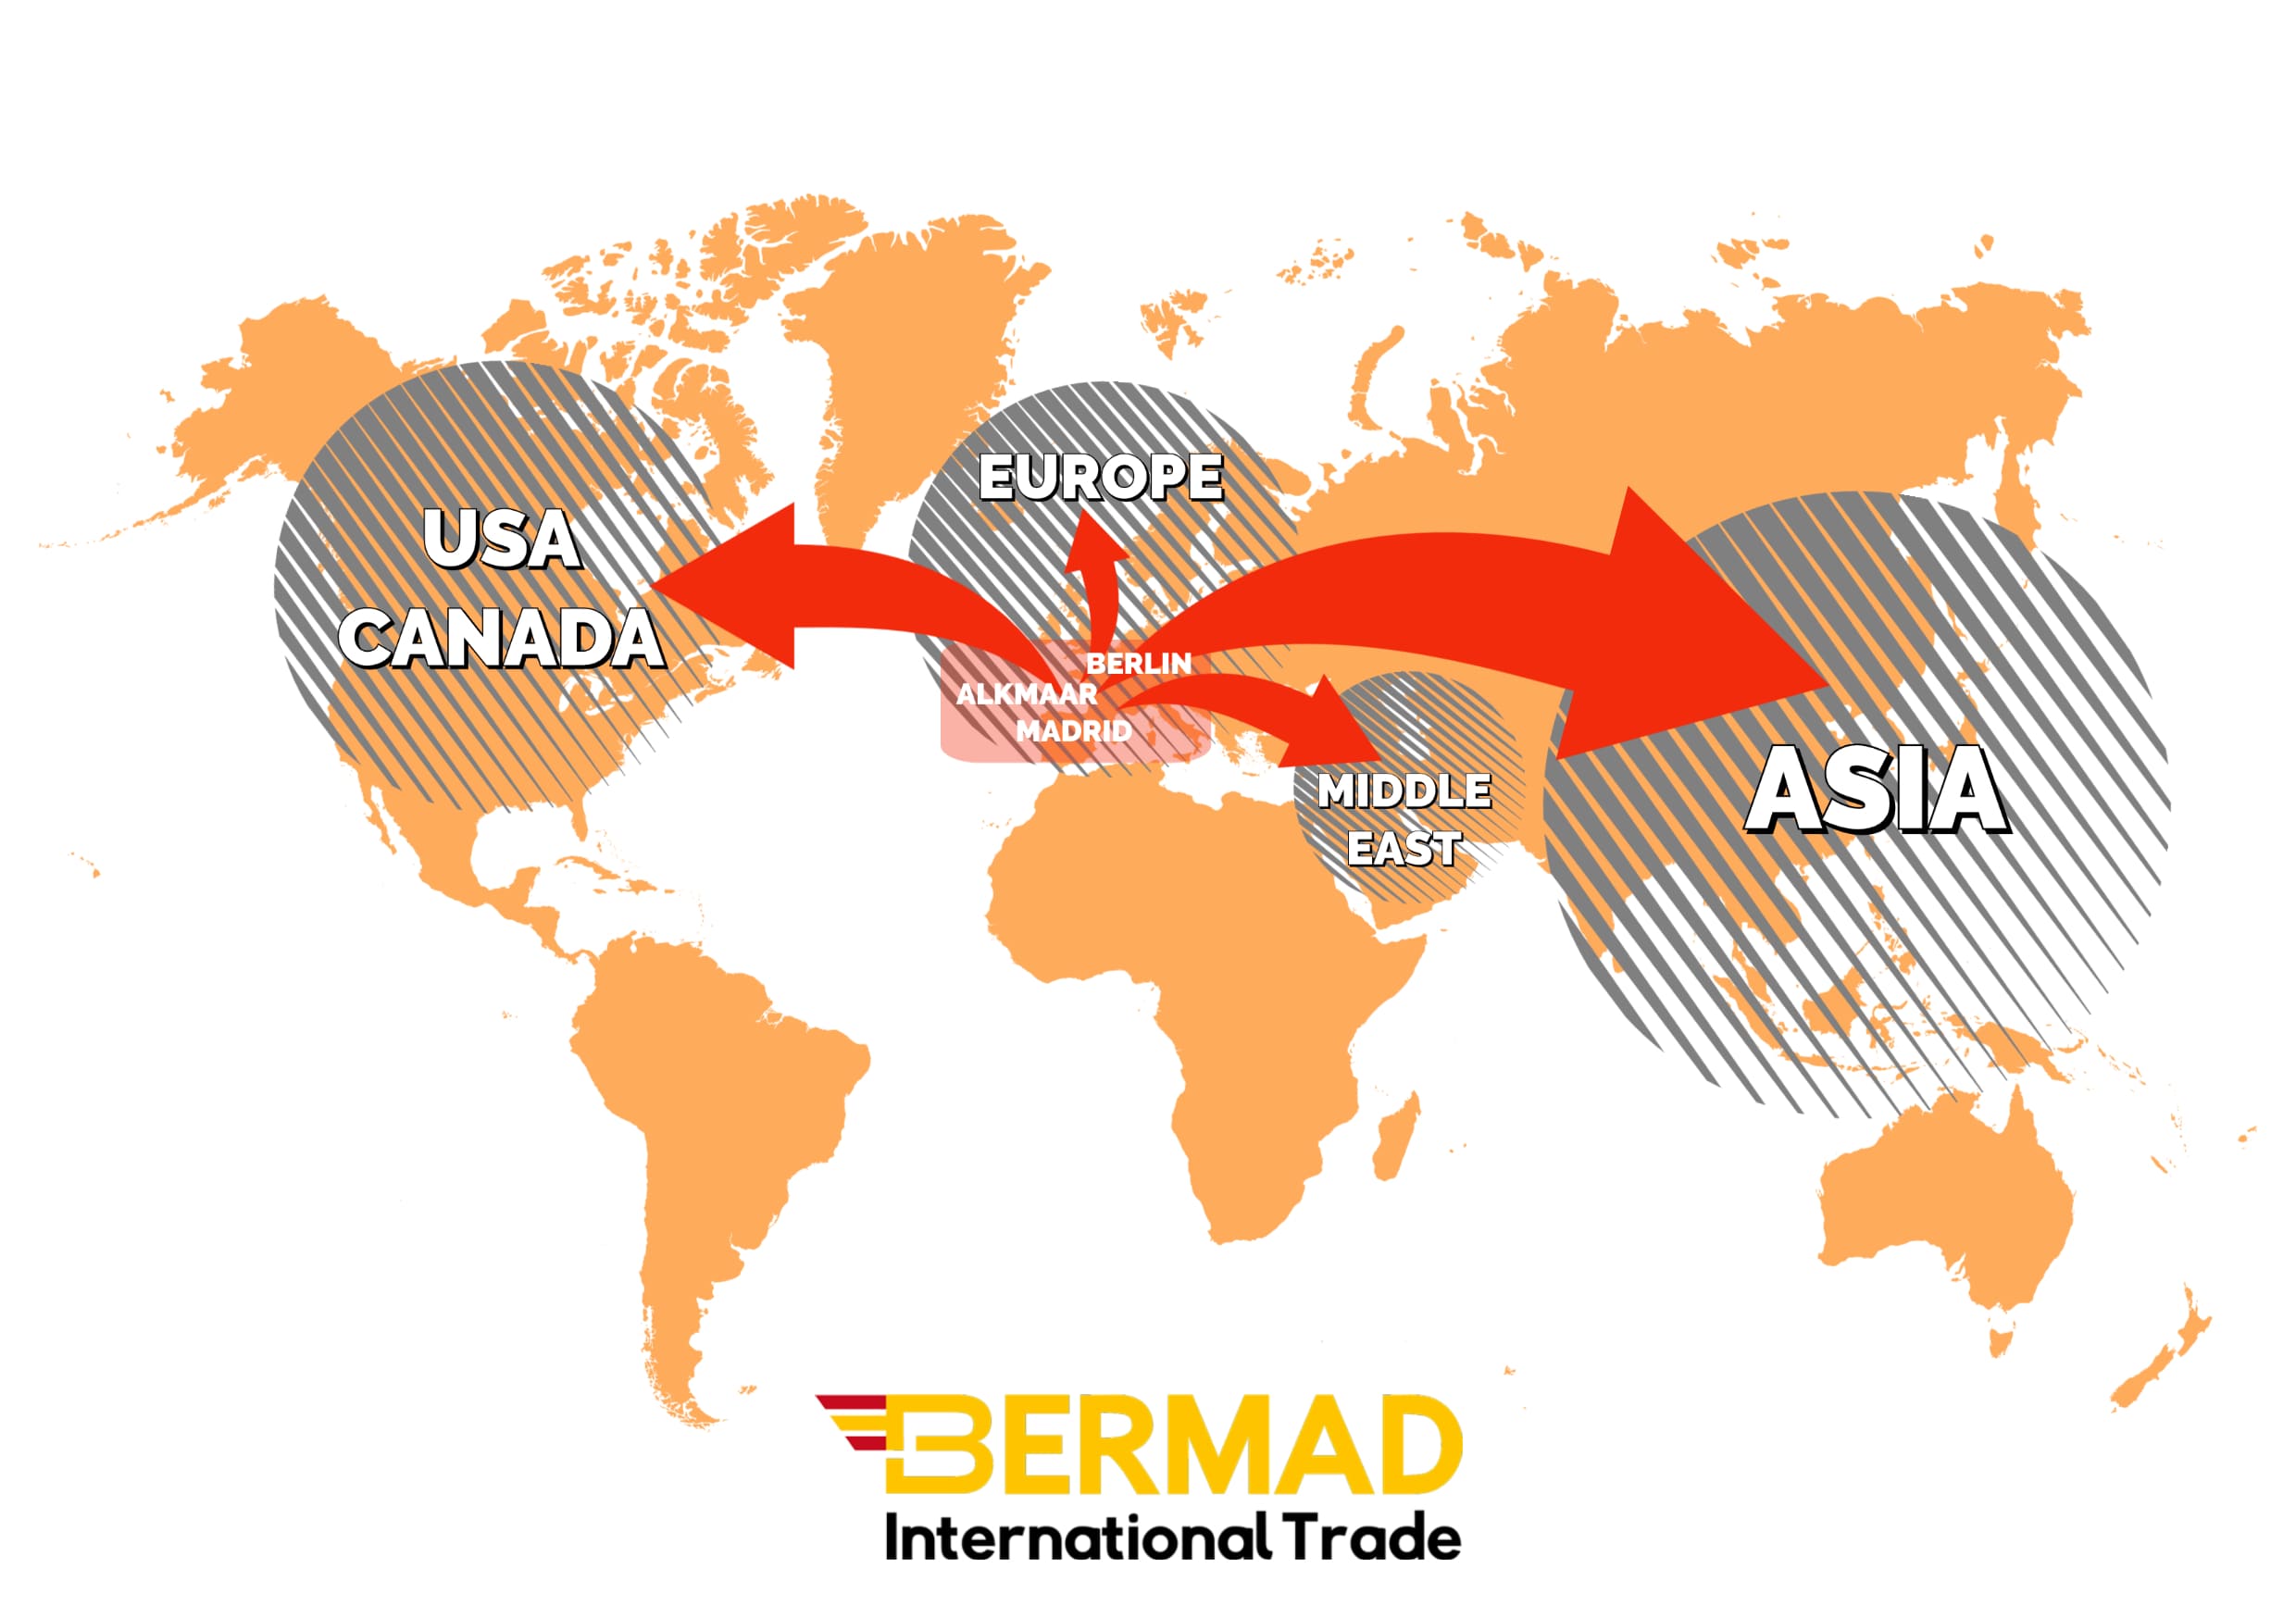 BERMAD International Trade. FMCG (Fast Moving Consuming Goods) and NON-FOOD products international trade